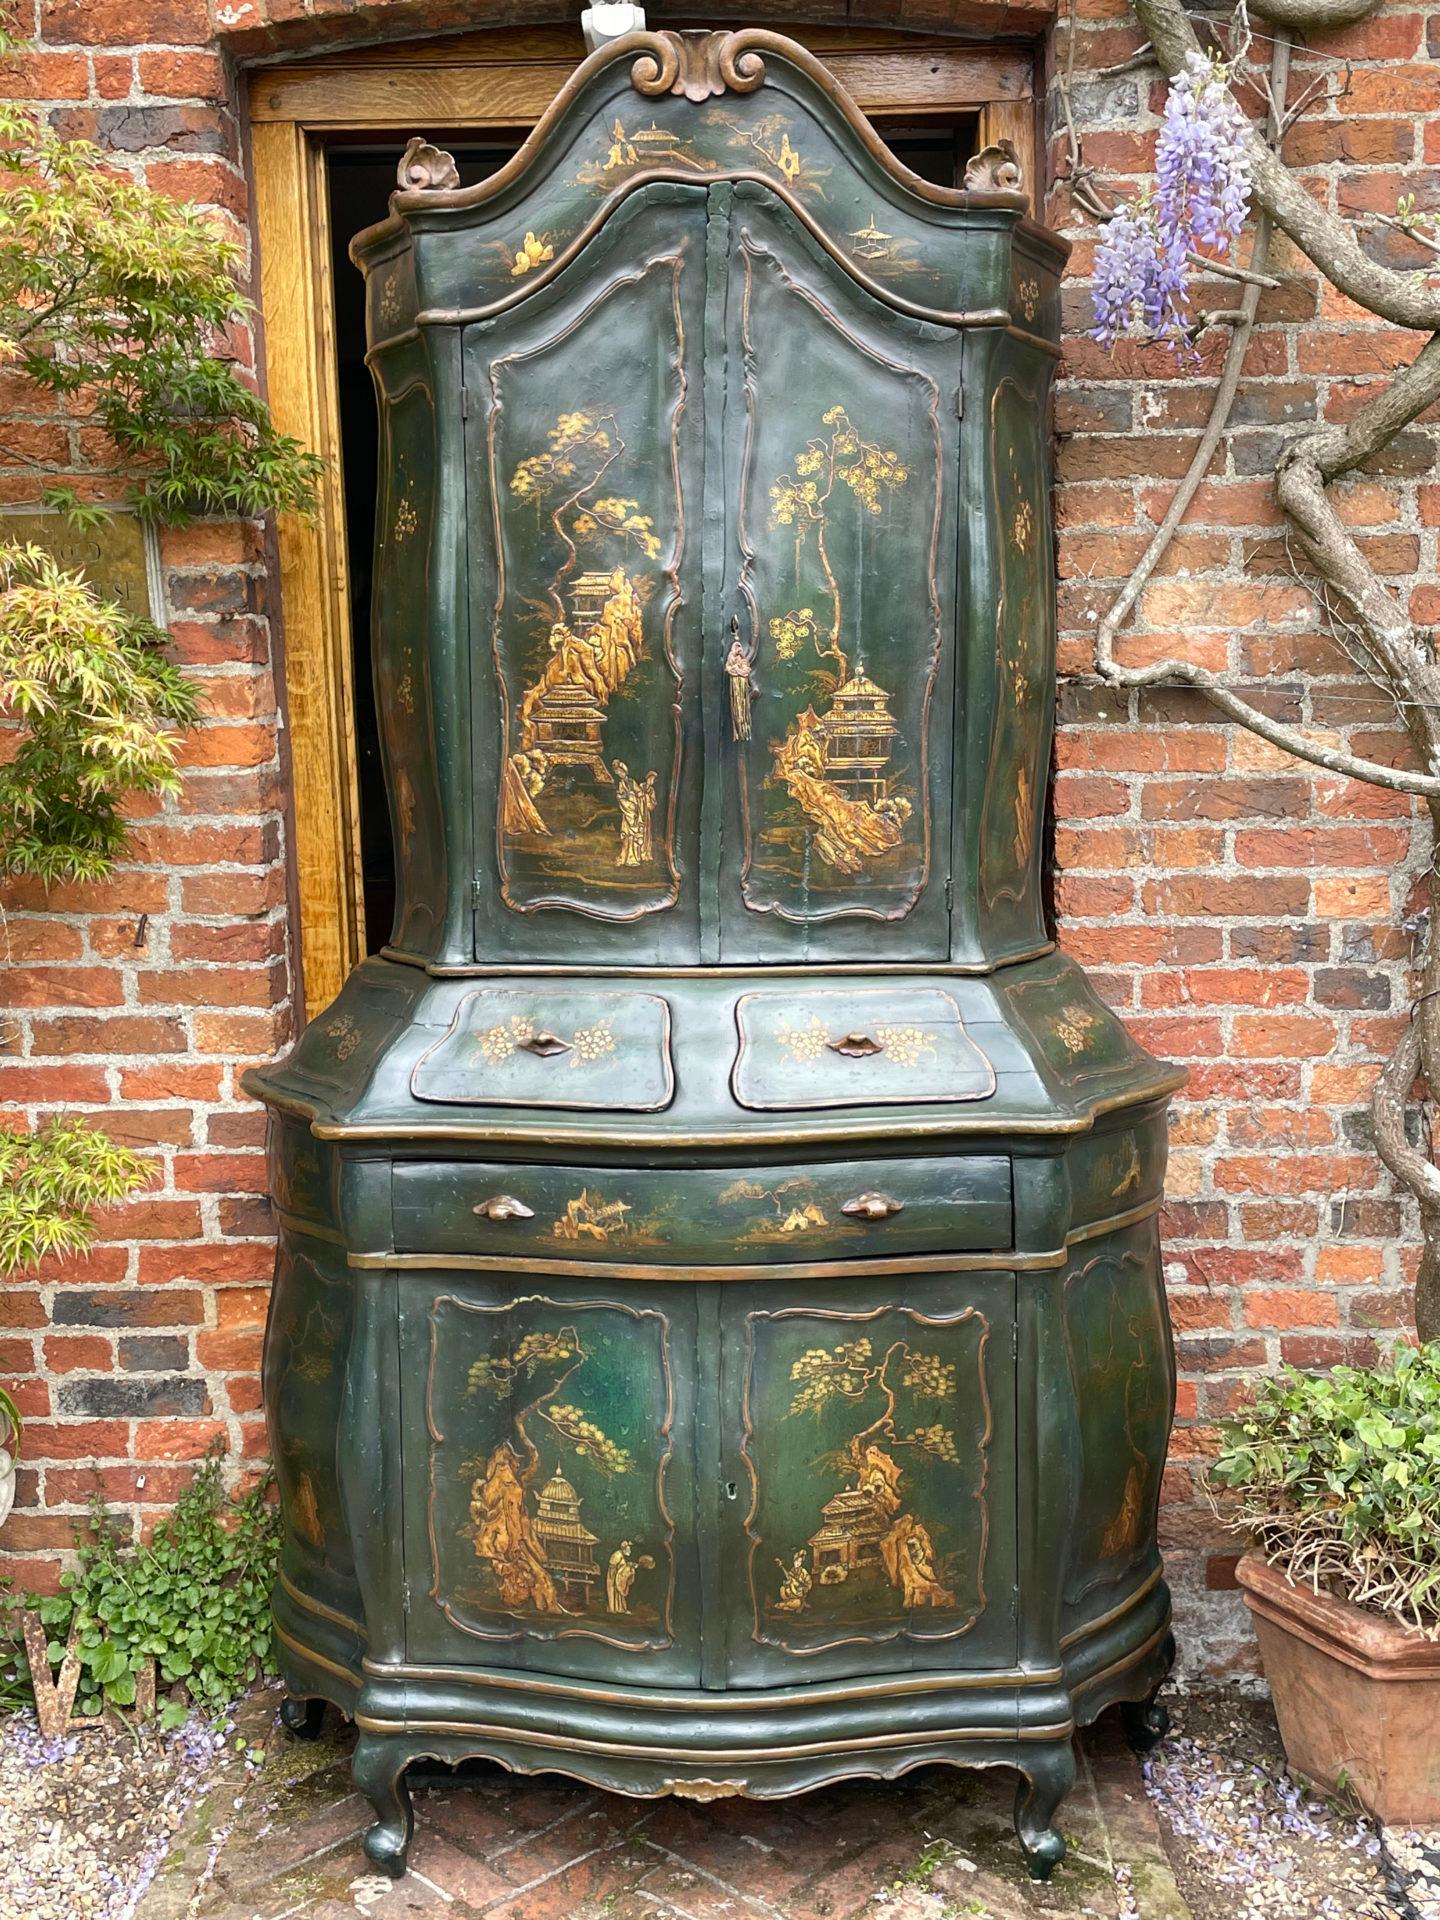 An antique Venetian rococo japanned (or 'lacquer') cabinet.

This rare and sophisticated antique cabinet separates in two, with bombé and serpentine profiles.

The particularly fine and detailed lacquer* is executed on a blue green ground and